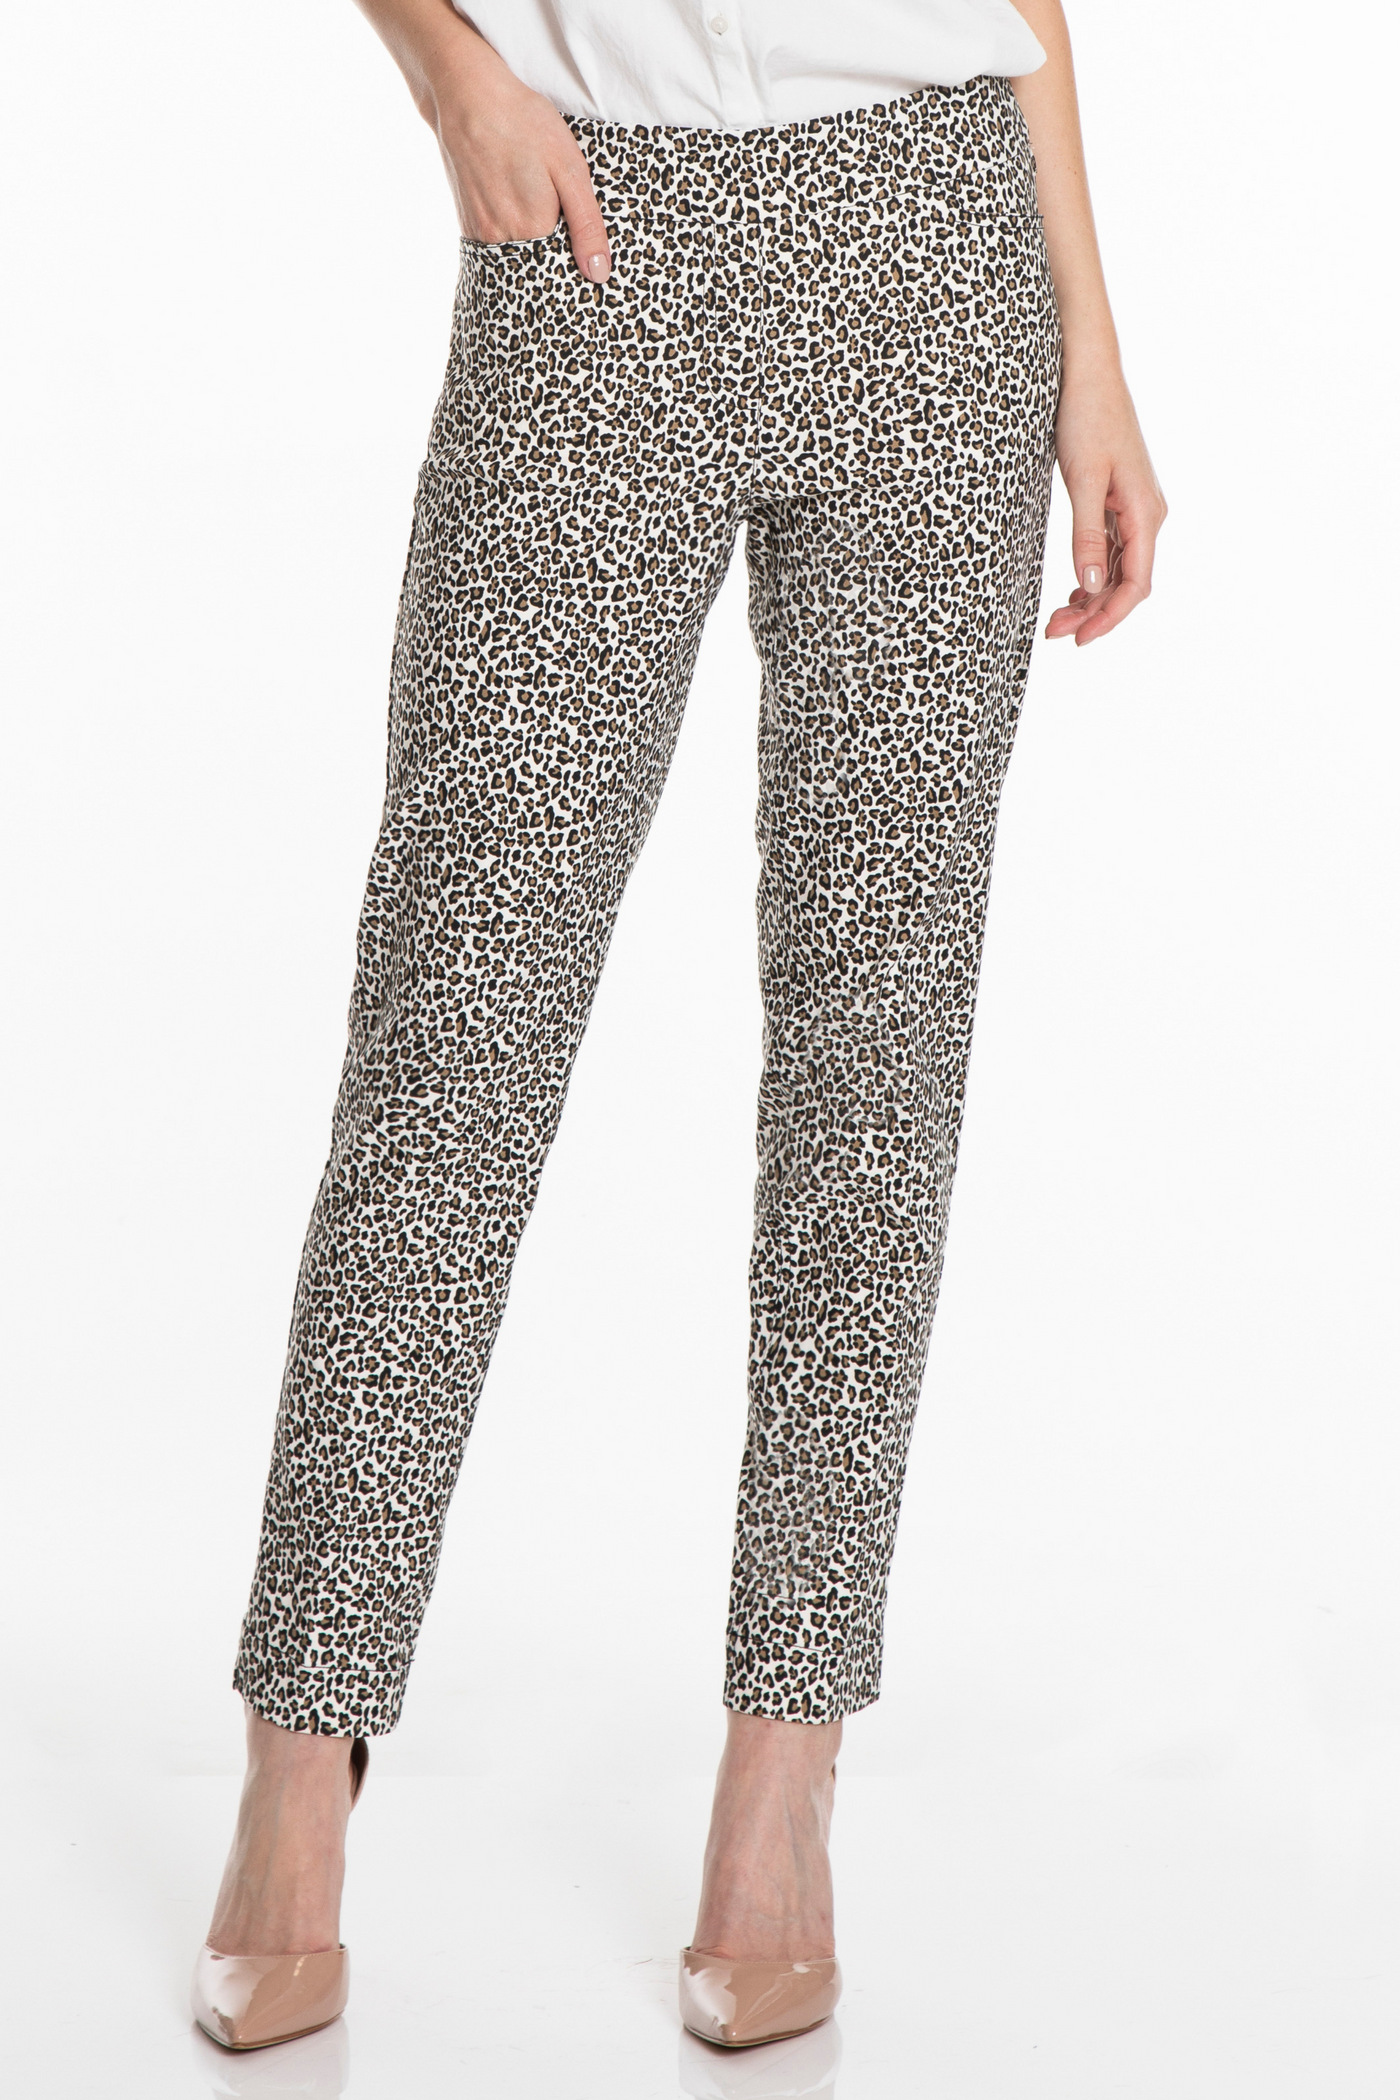 PRINT PULL-ON ANKLE PANT - Leopard Print